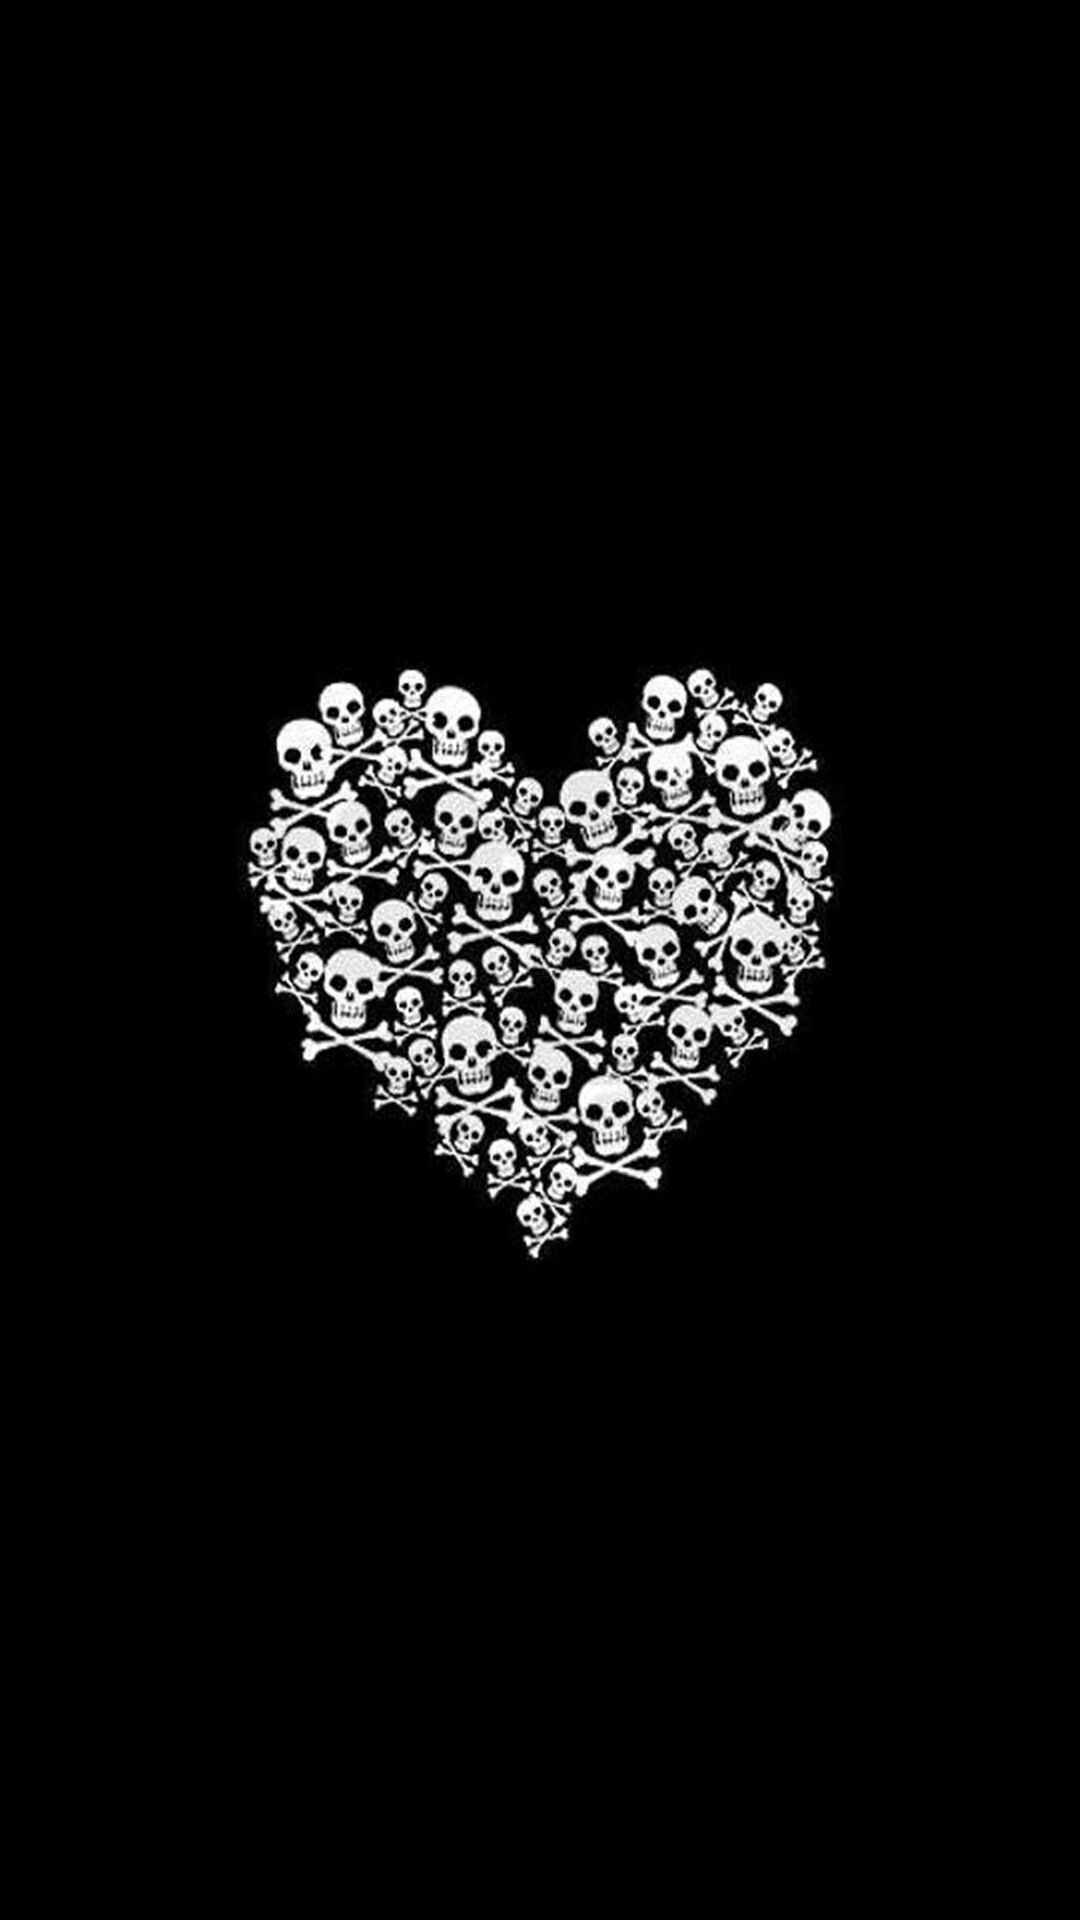 A heart made out of skulls on a black background - Skull